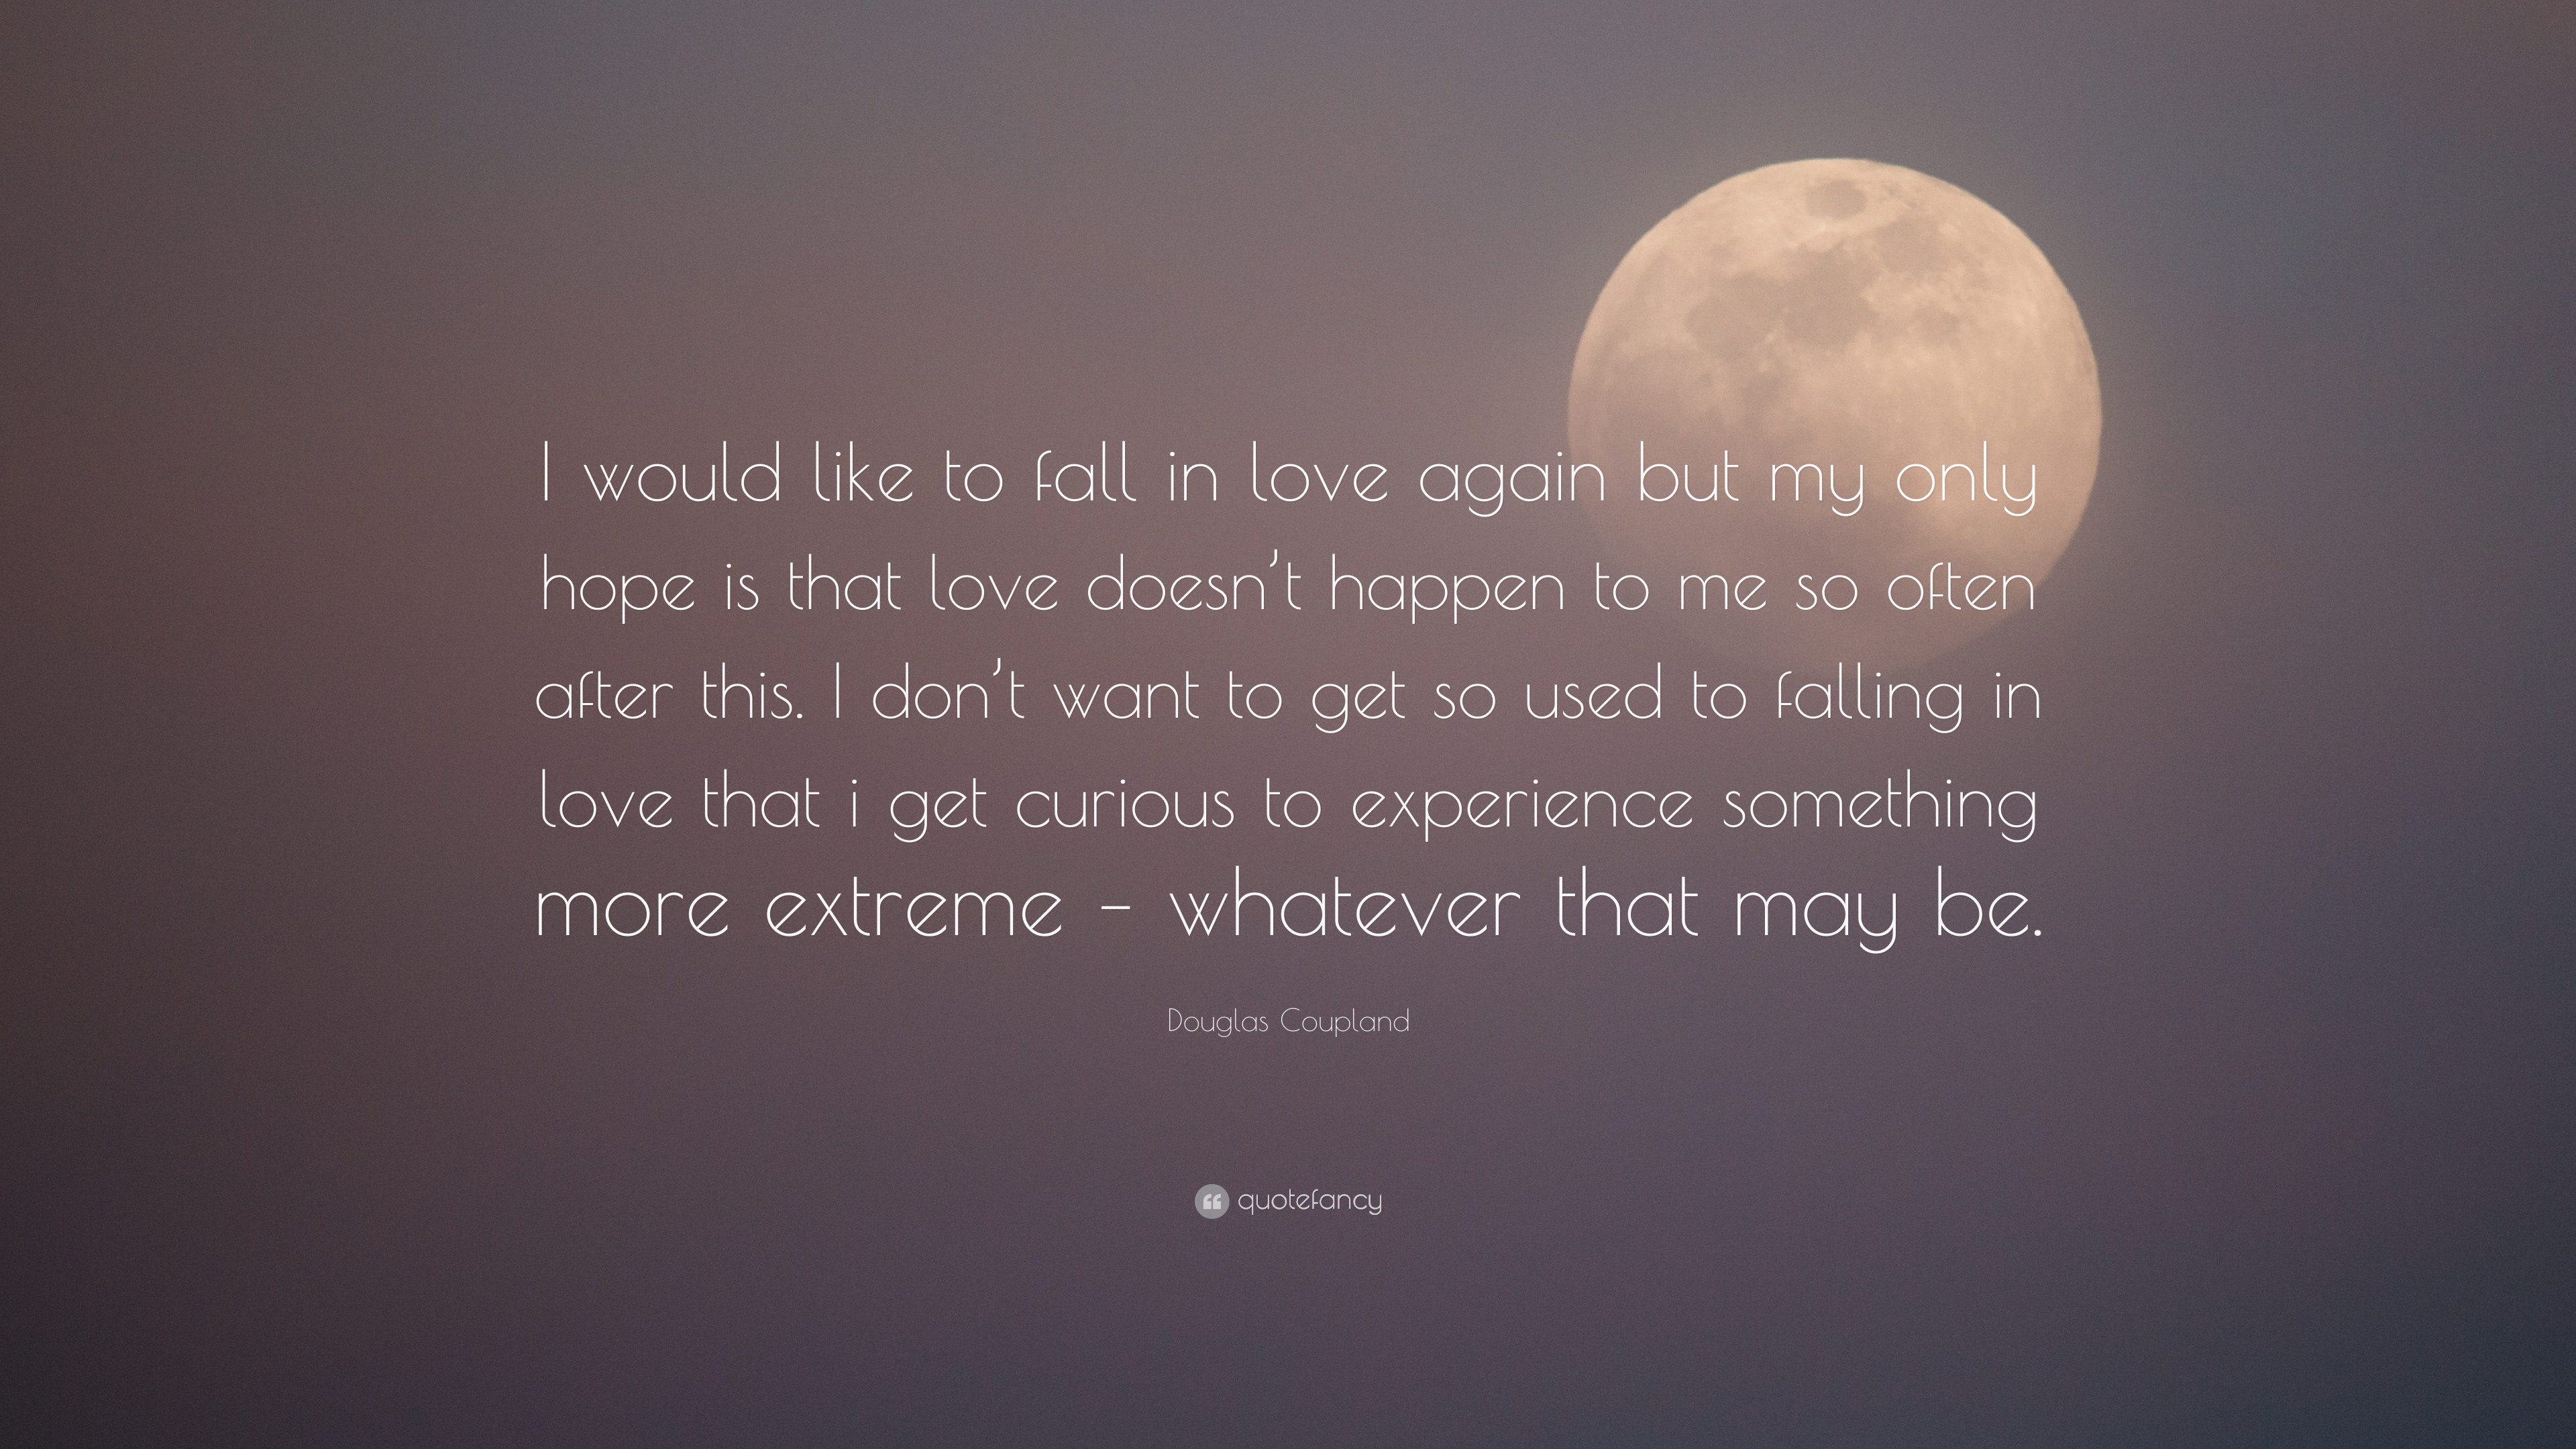 Quotes about starting to fall in love